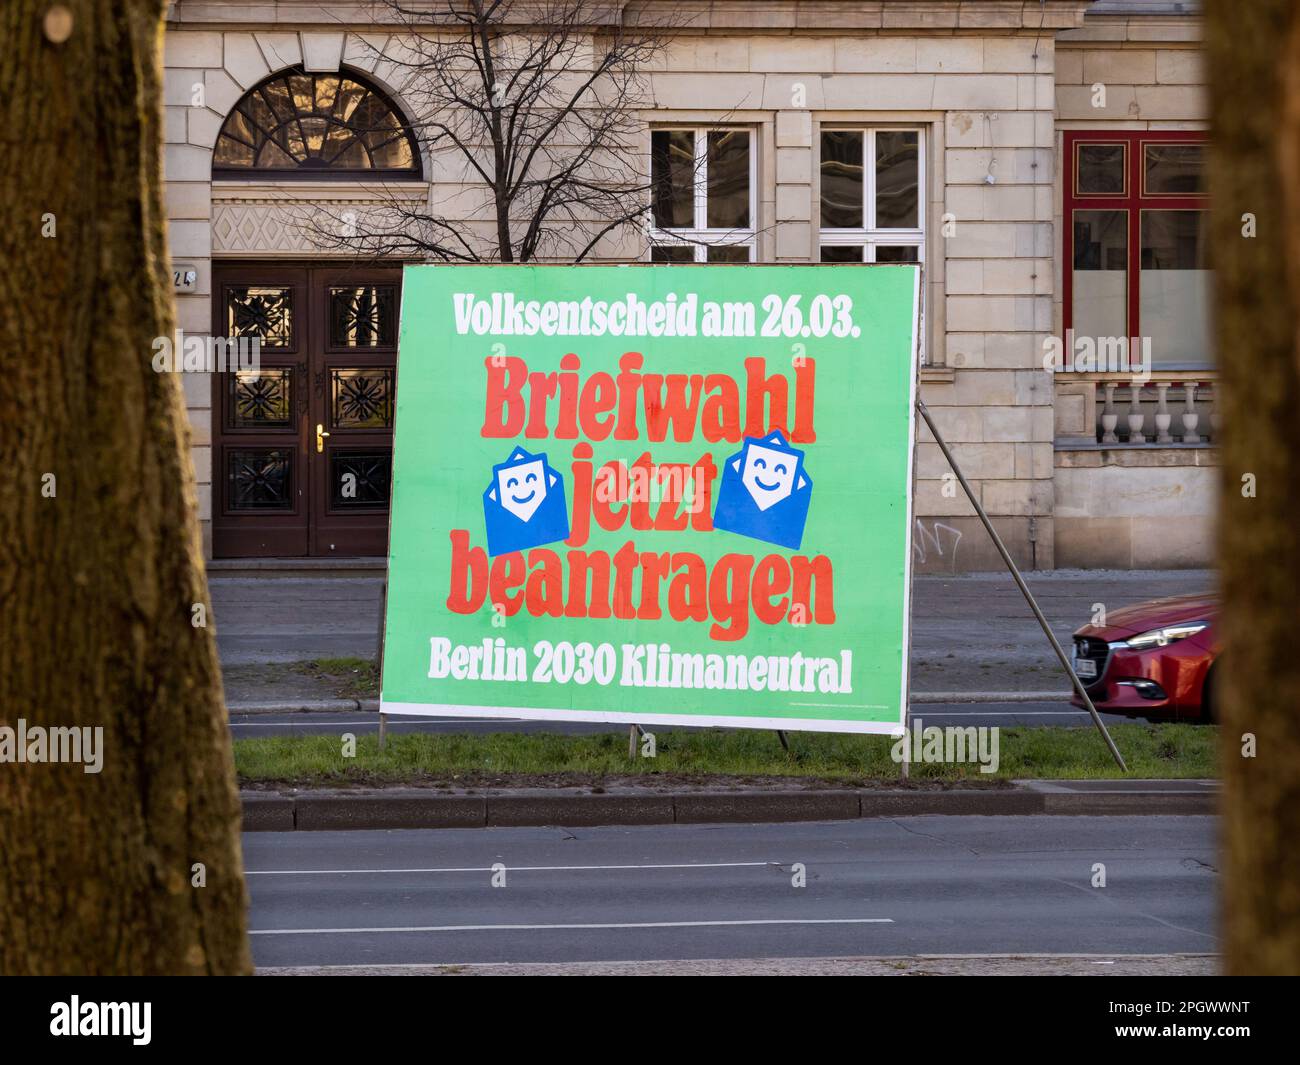 Postal voting advertisement placard in the middle of a street. Vote for climate neutrality until 2030 in a public referendum on 26 March 2023. Stock Photo